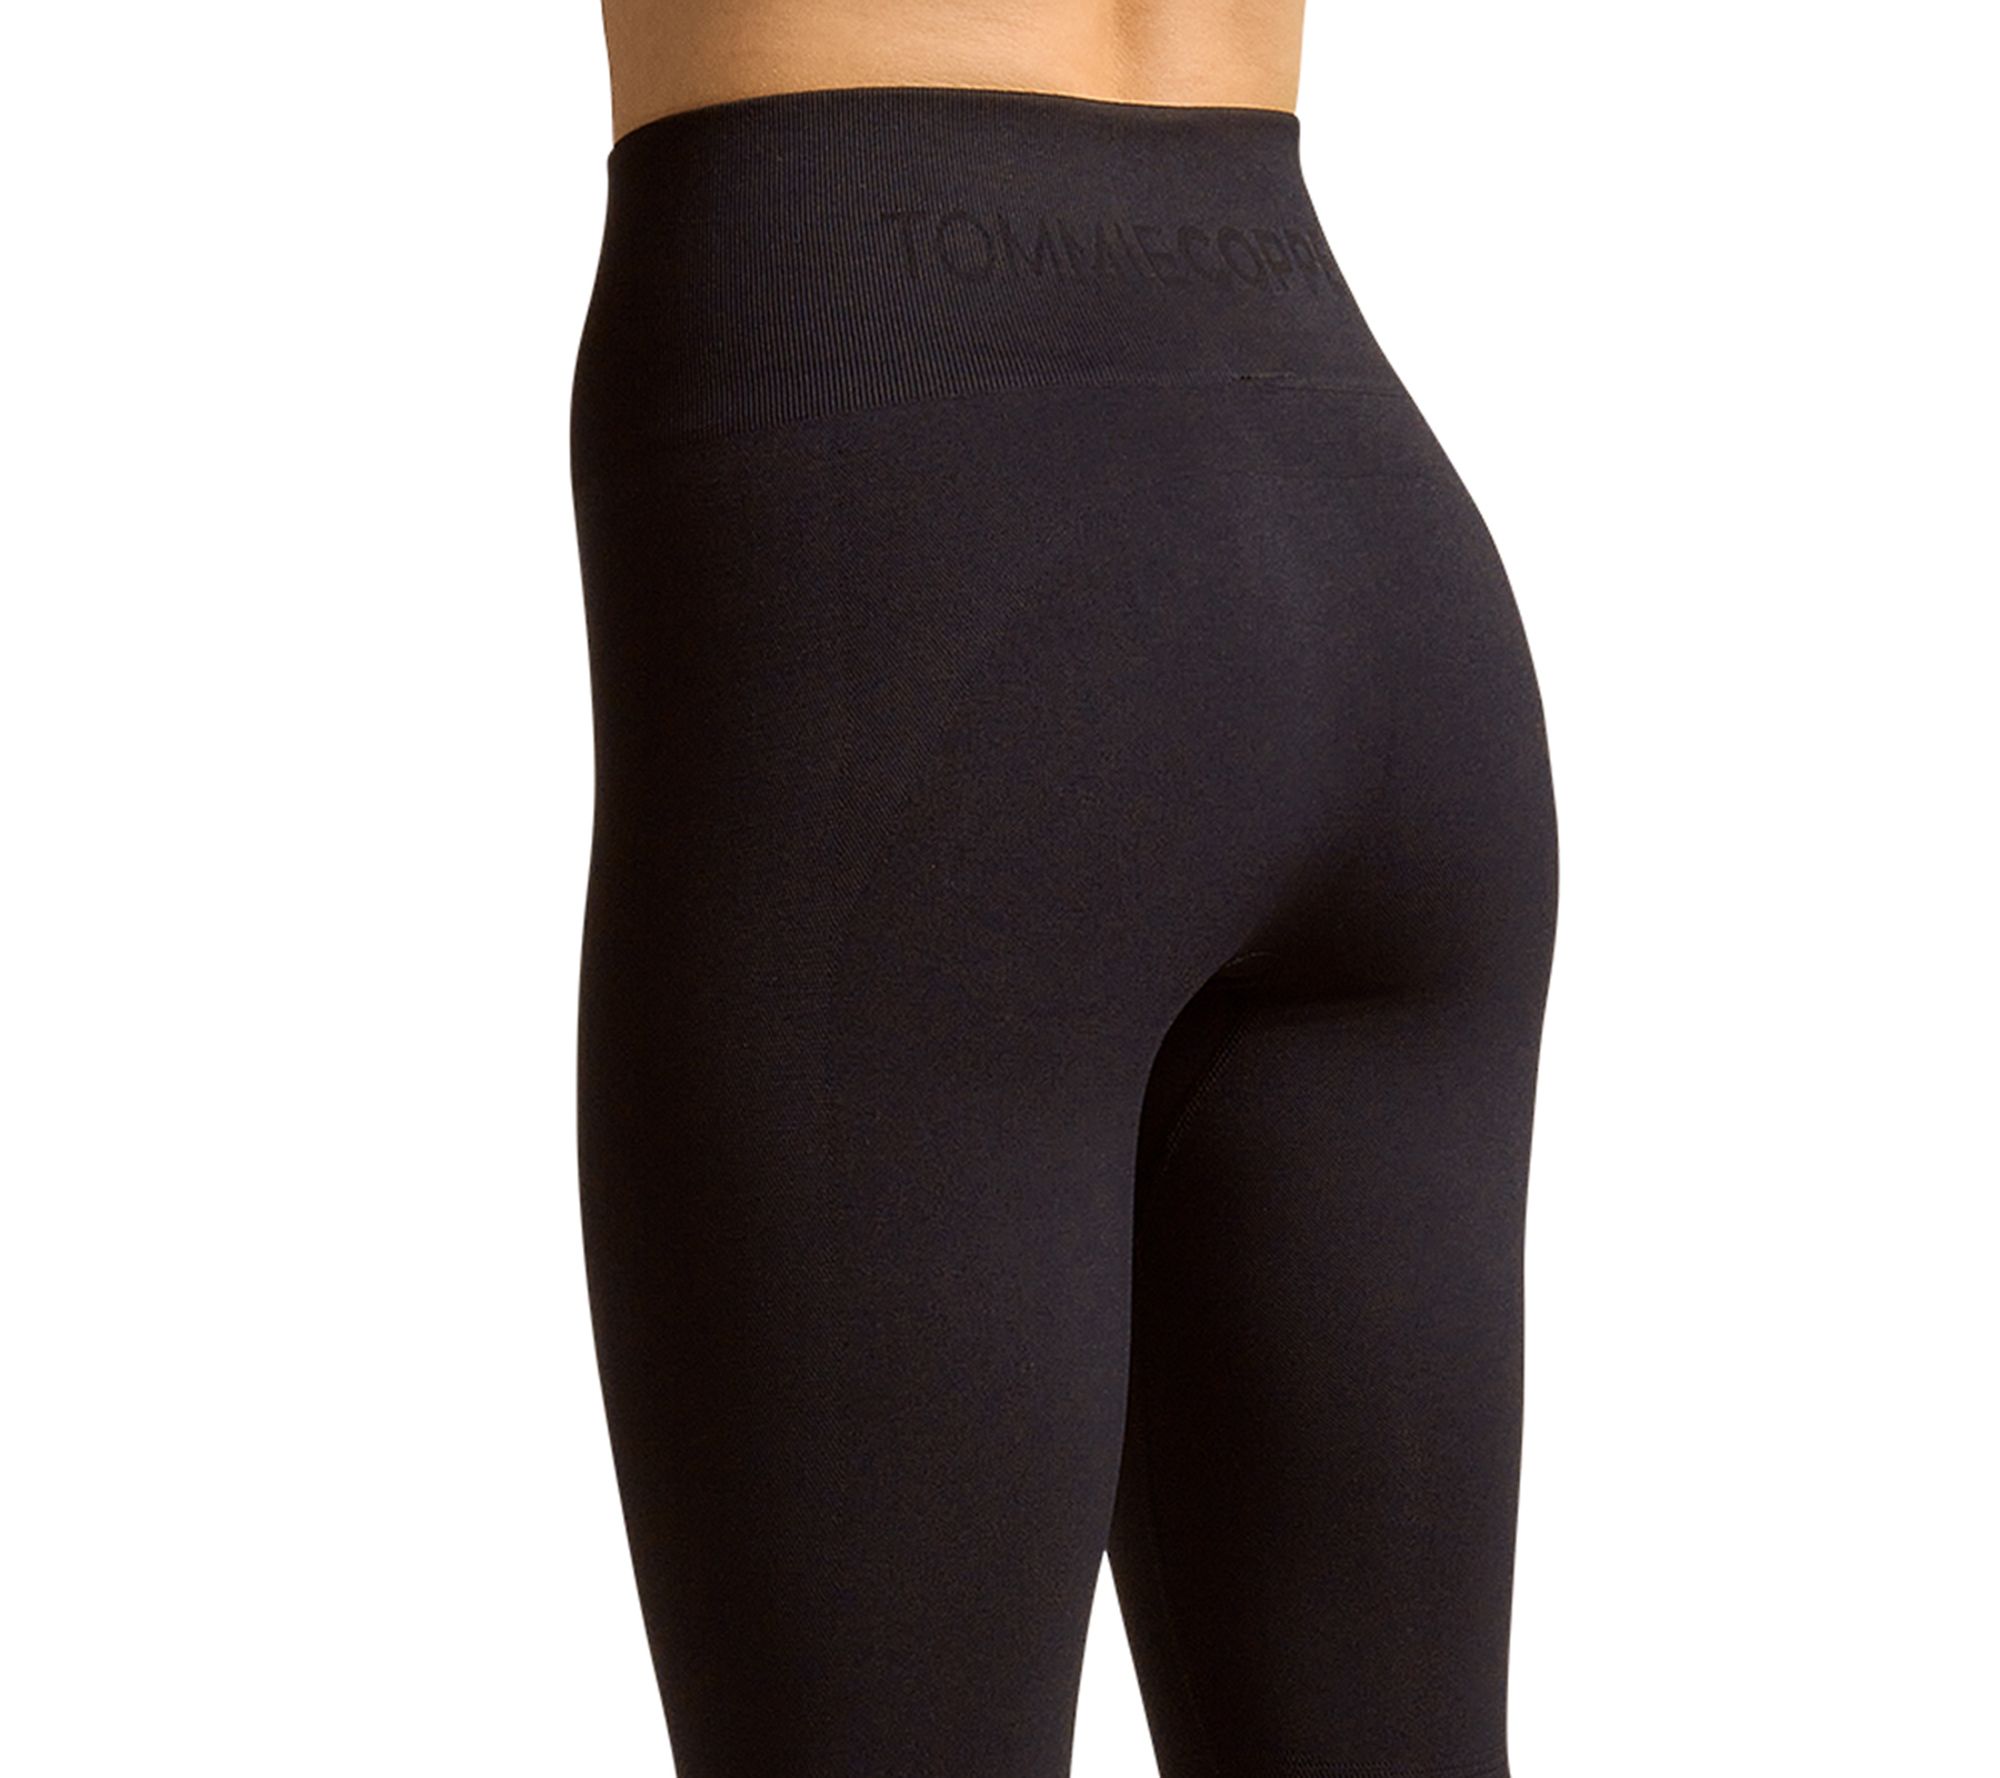 Women's black opaque stretch cotton leggings Body Touch Easy